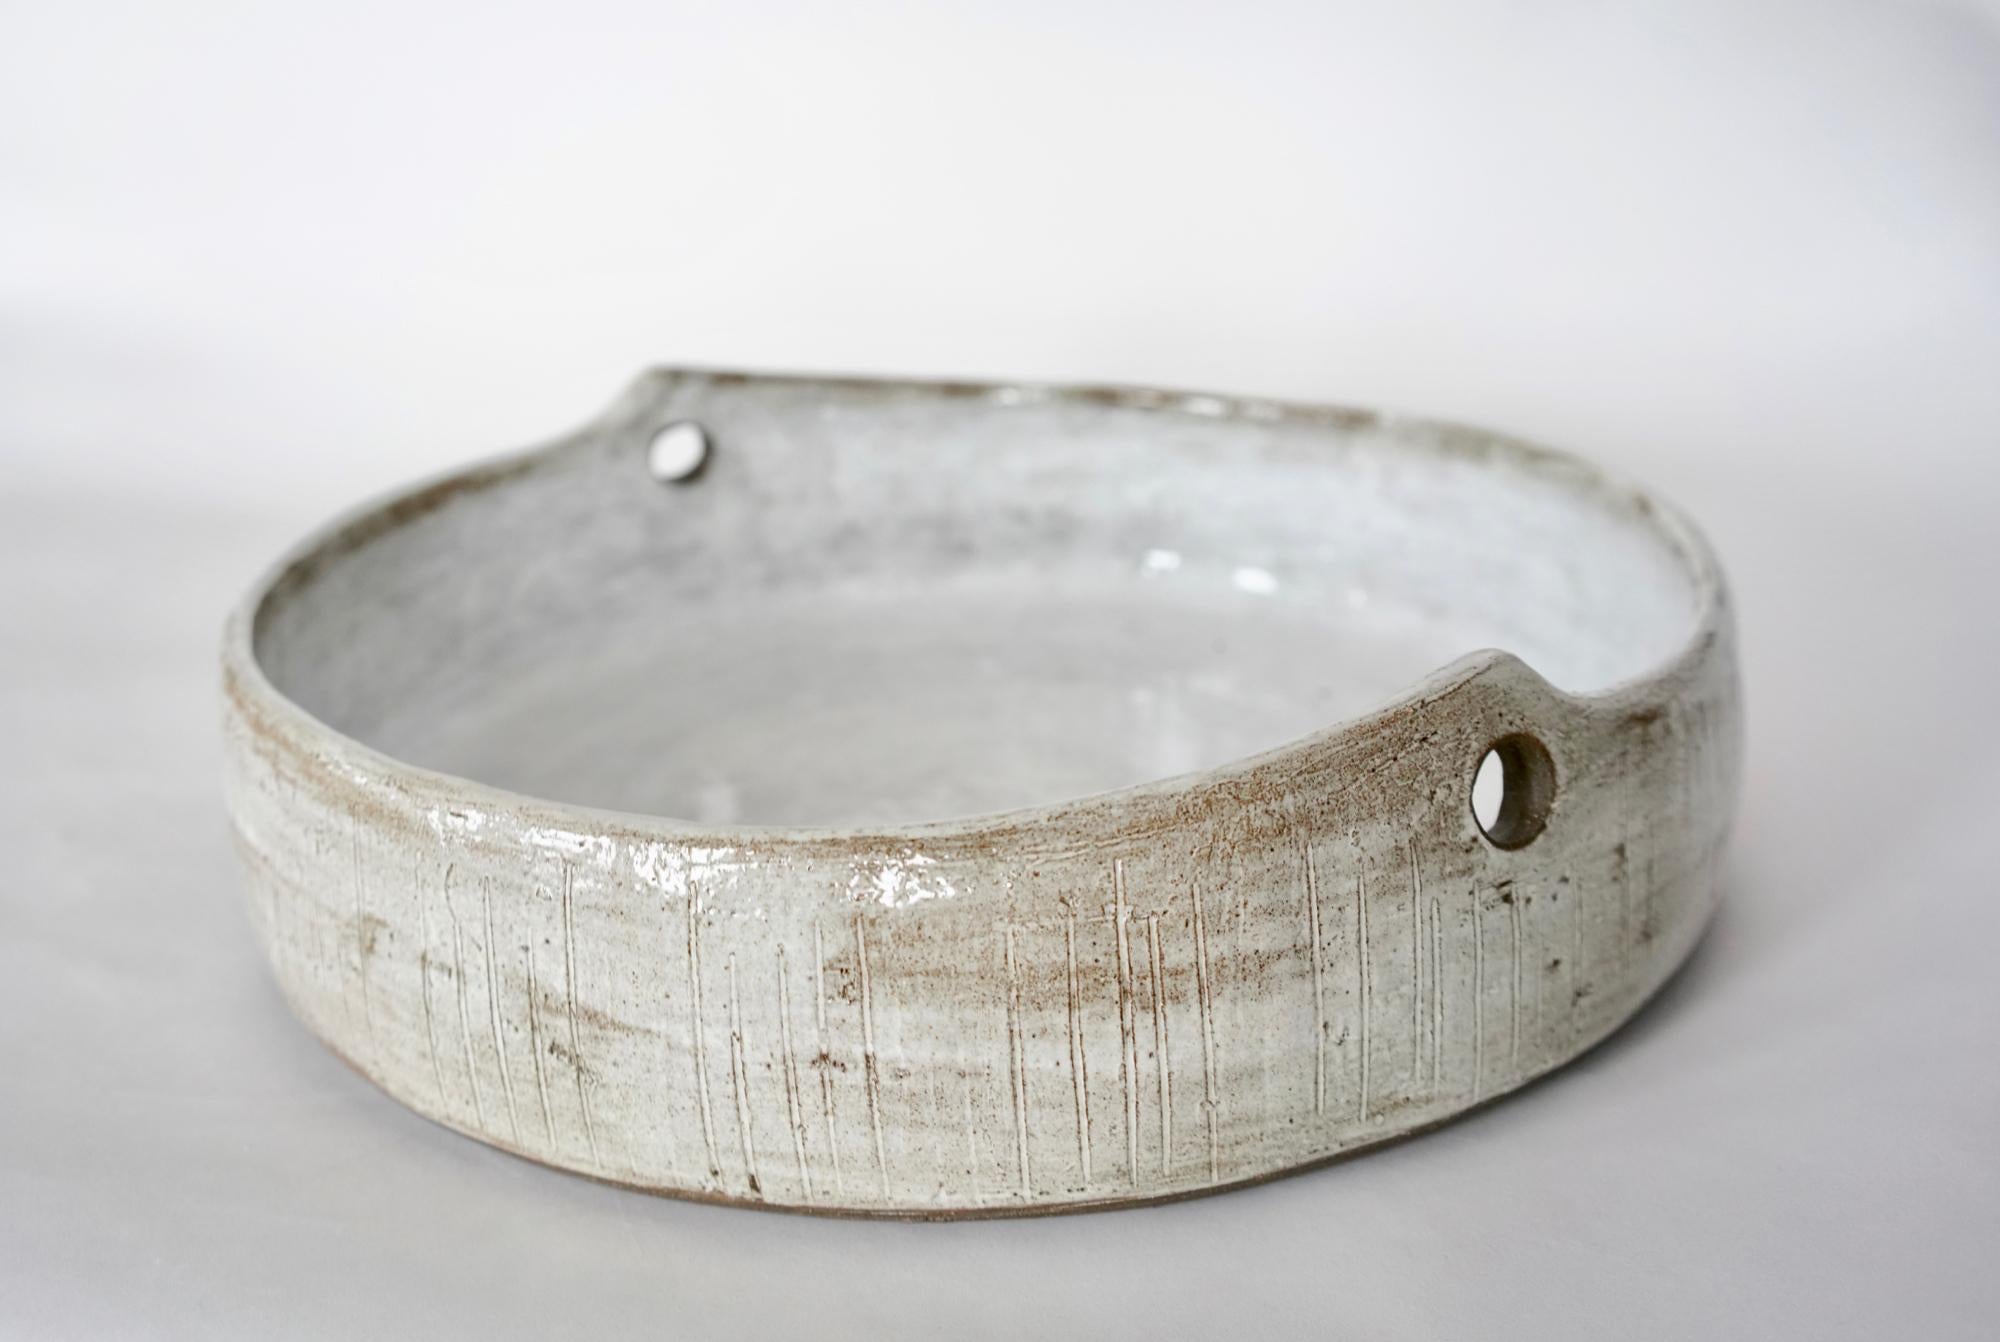 Large, wide and low ceramic stoneware serving bowl or center piece.
This Modern yet rustic piece features subtle hand carved markings on the exterior. A mottled glossy white glaze over dark clay reveals the clay body and adds depth of color, giving